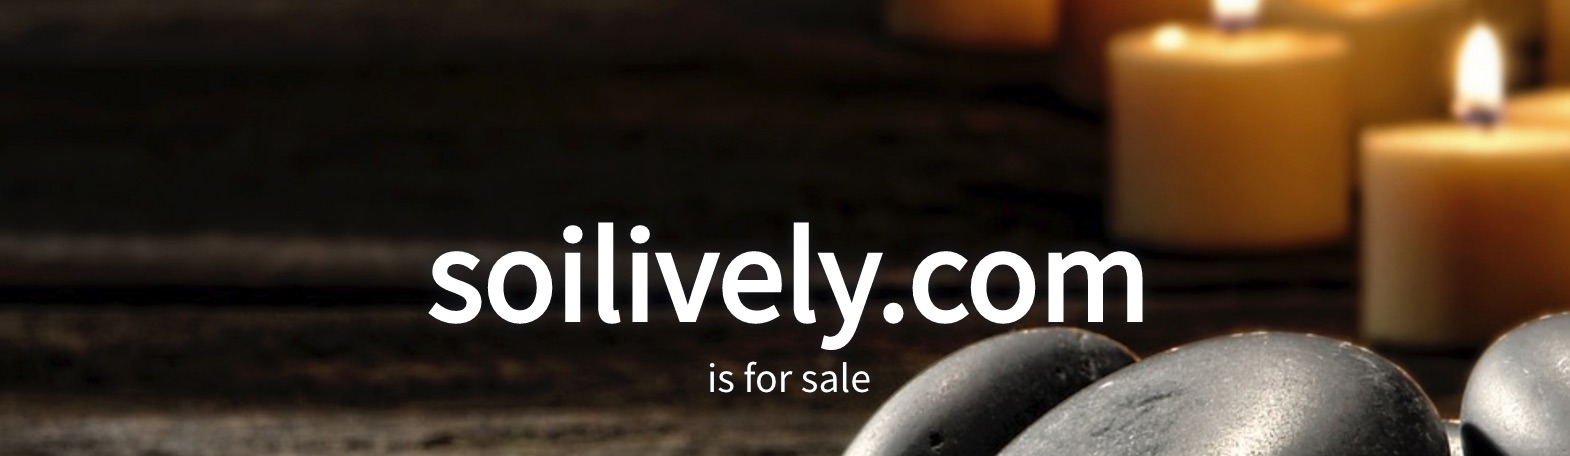 soilively_com_is_available_for_purchase_-_sedo_com_f09f948a.jpg